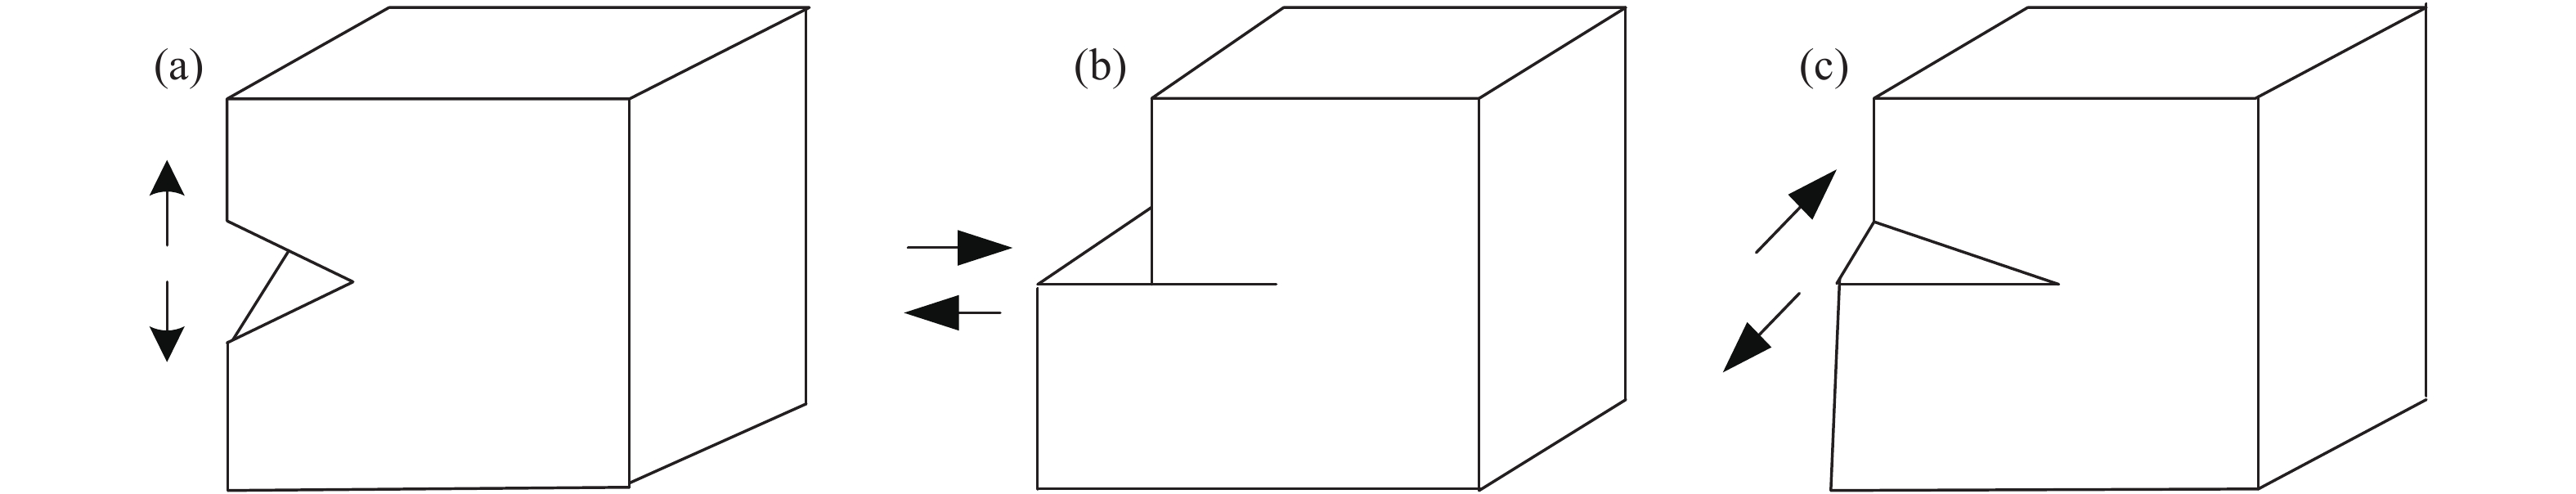 Schematic diagram of three typical crack expanding mode. (a) Mode I crack(opening mode); (b) Mode II crack(sliding mode); (c) Mode III crack(tearing type)